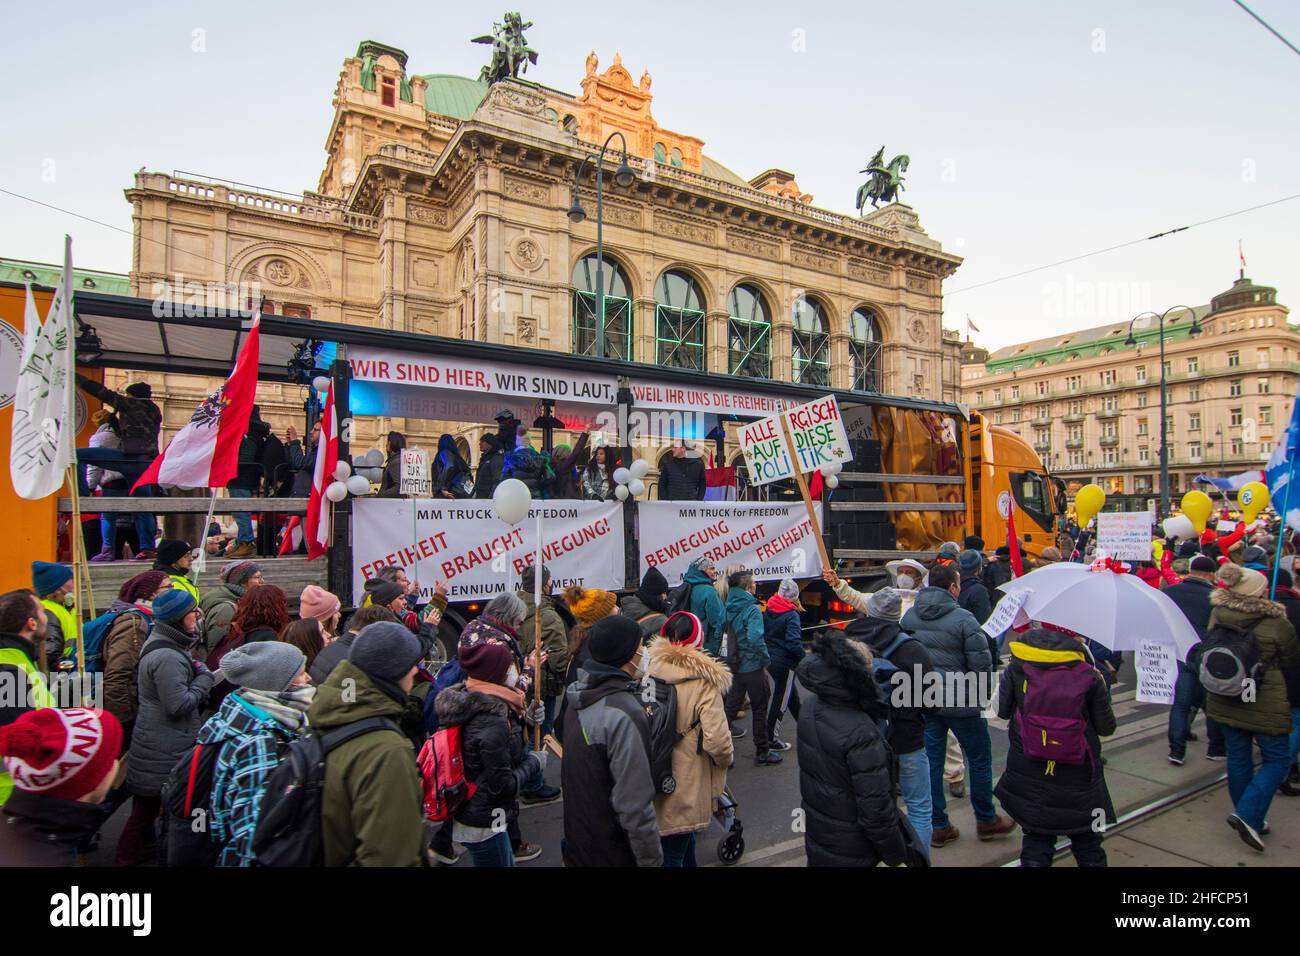 Wien, Vienna: Corona protest demonstration in front of opera Staatsoper, opponents of the corona measures march in 01. Old Town, Wien, Austria Stock Photo